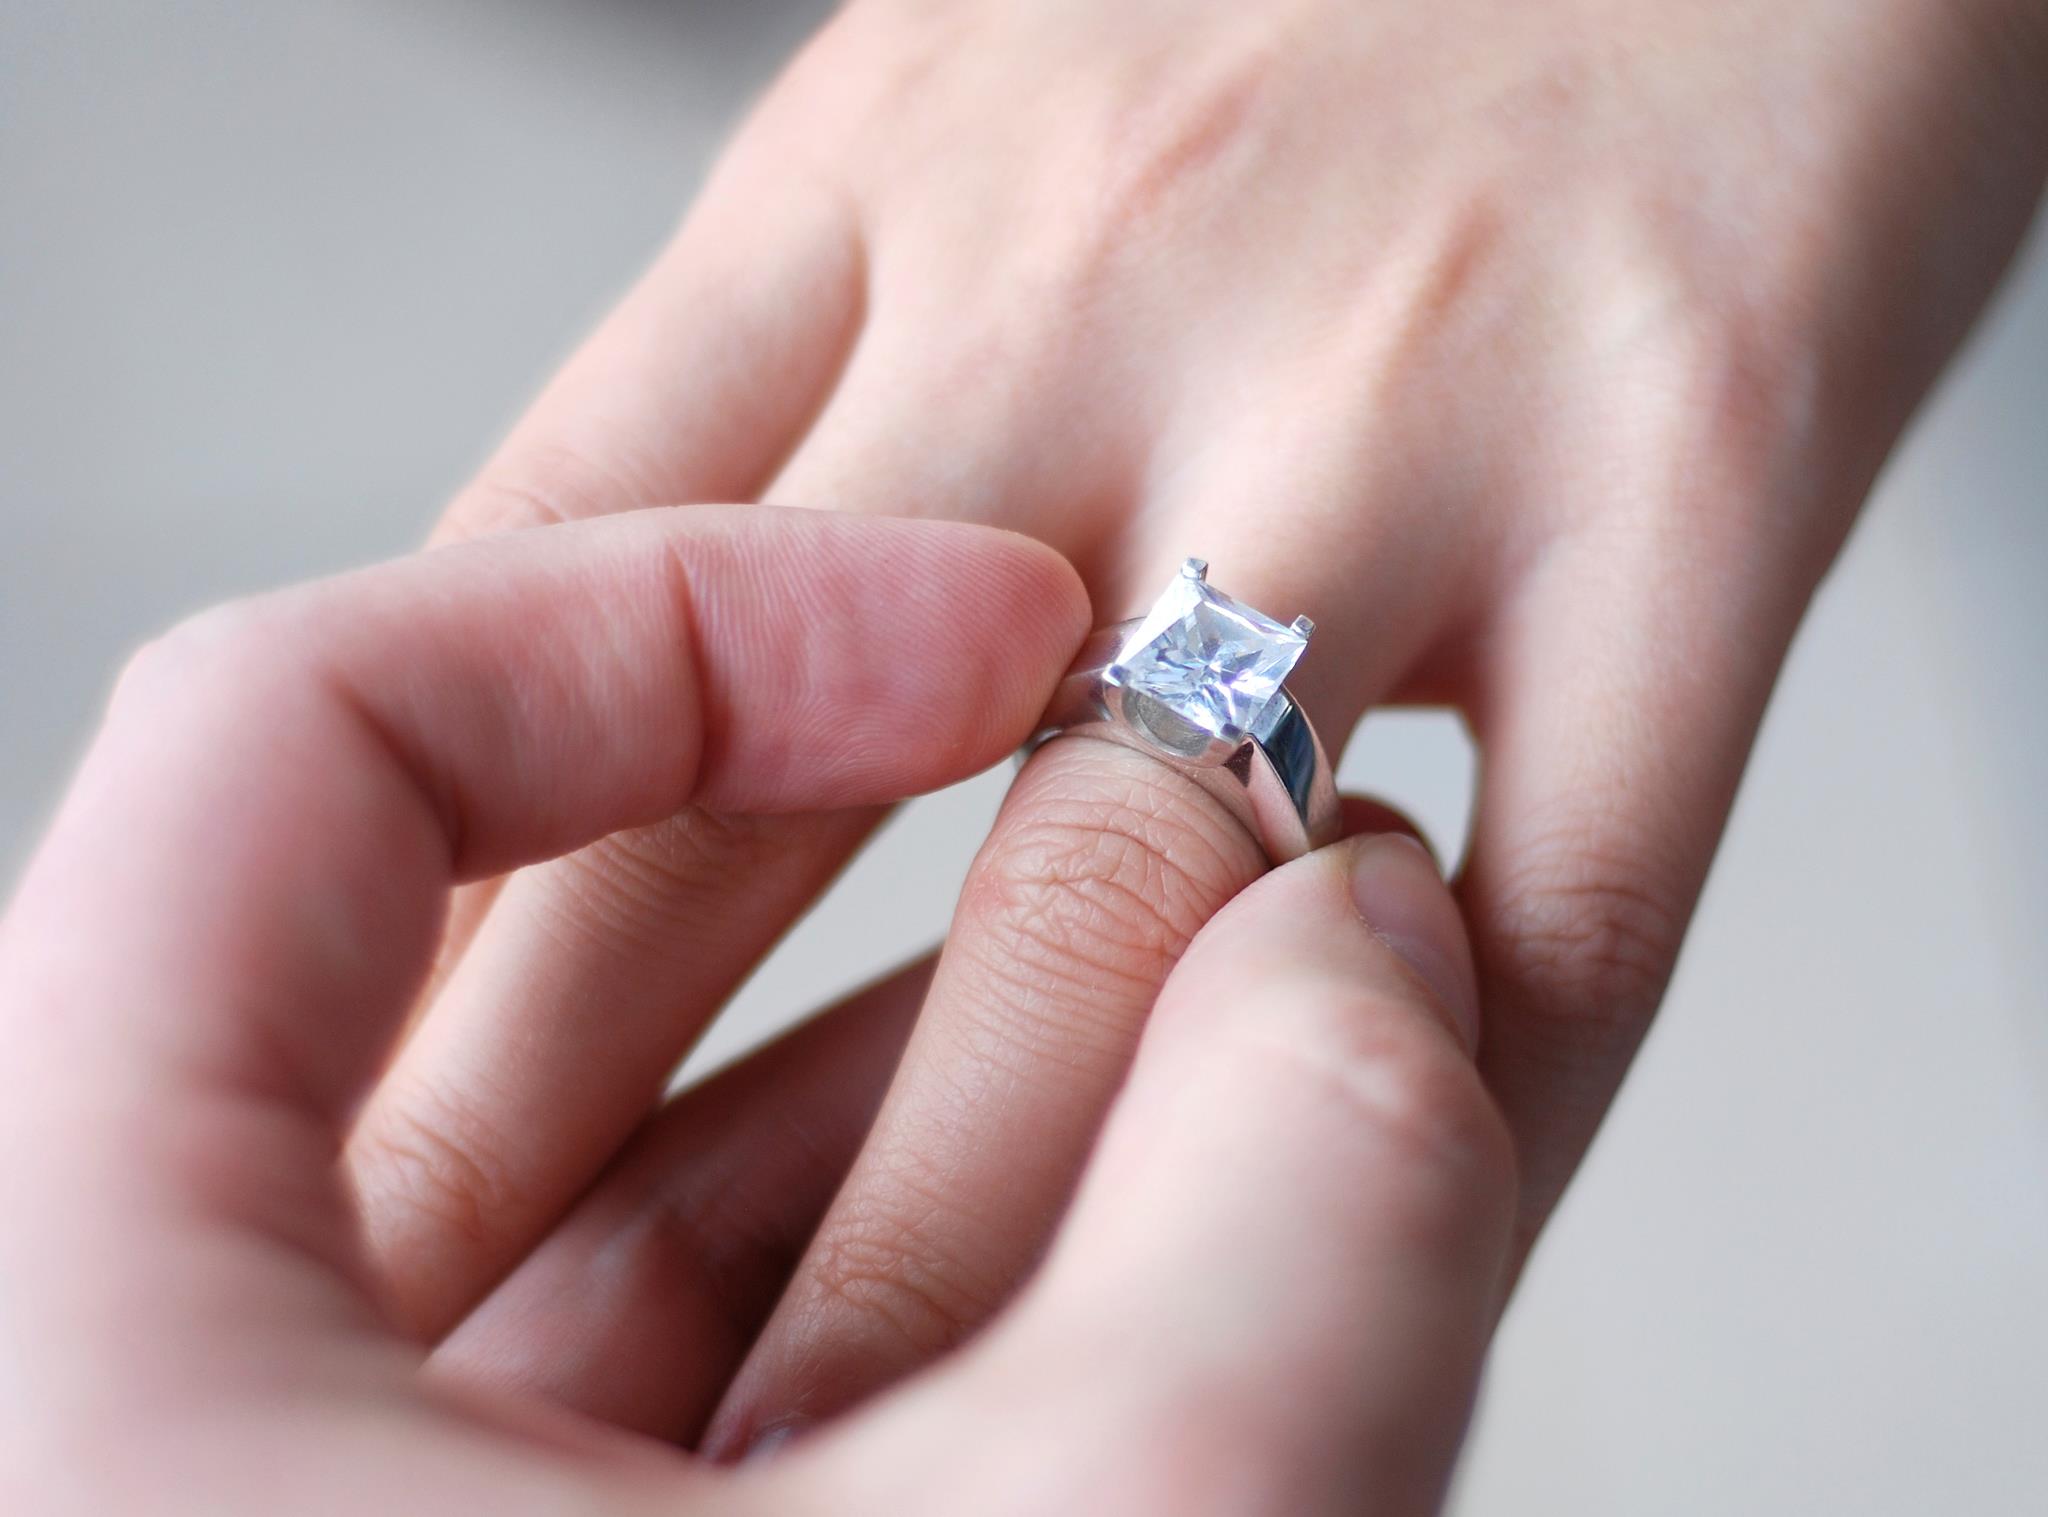 Why is an engagement ring worn in ring finger?